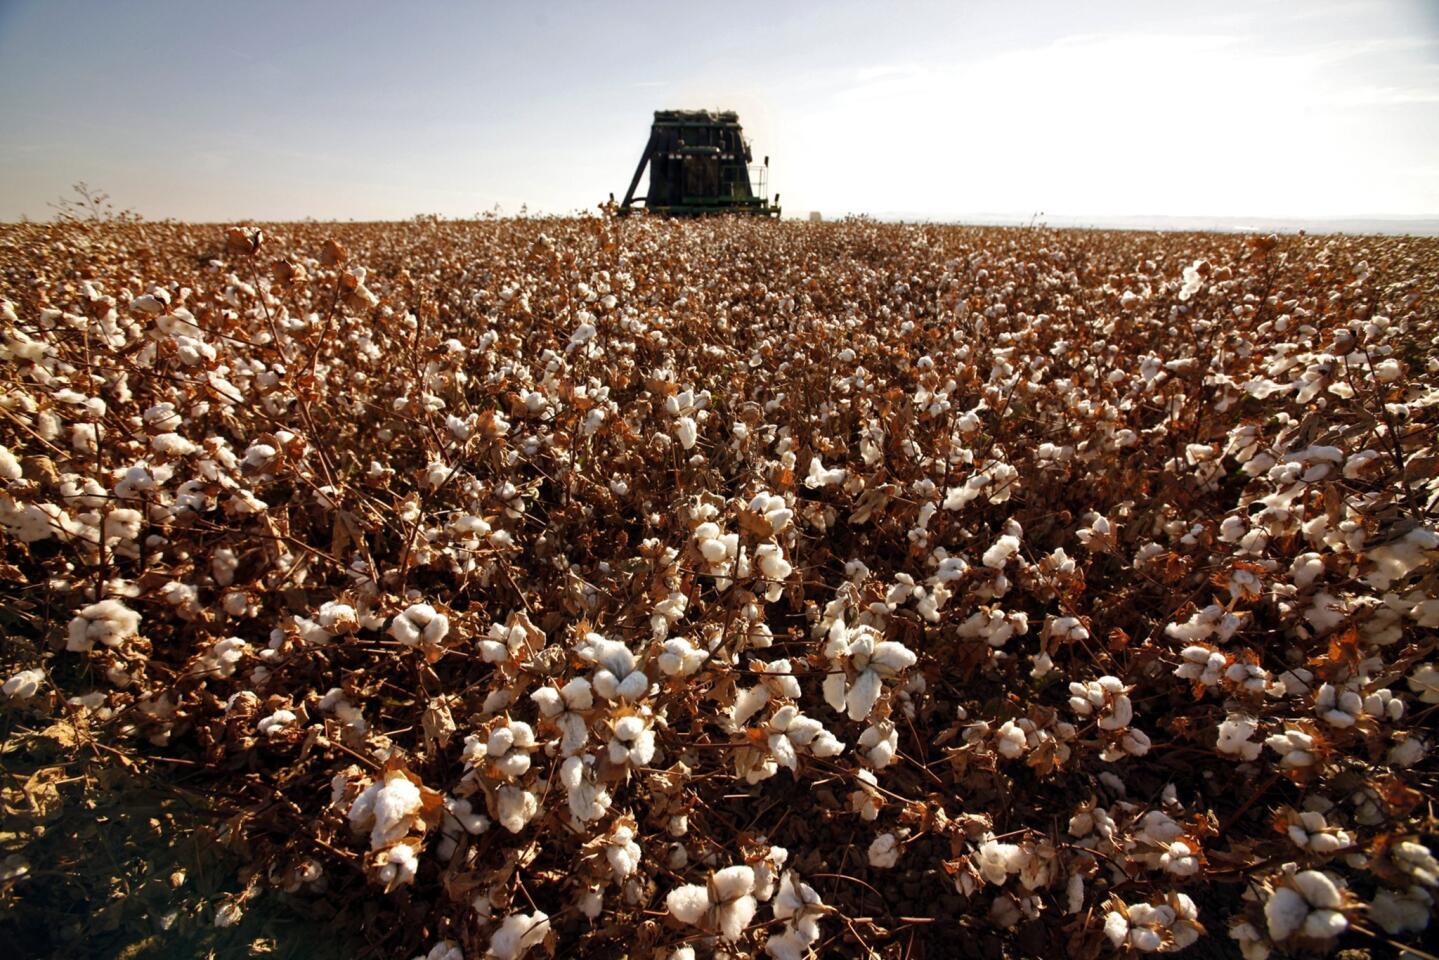 Just a few years ago, cotton production was booming in Central California, as seen in this 2010 photo of the fall harvest. But the United States Department of Agriculture says California farmers are planting as much as 35% less of some varieties in 2014 compared with last year.